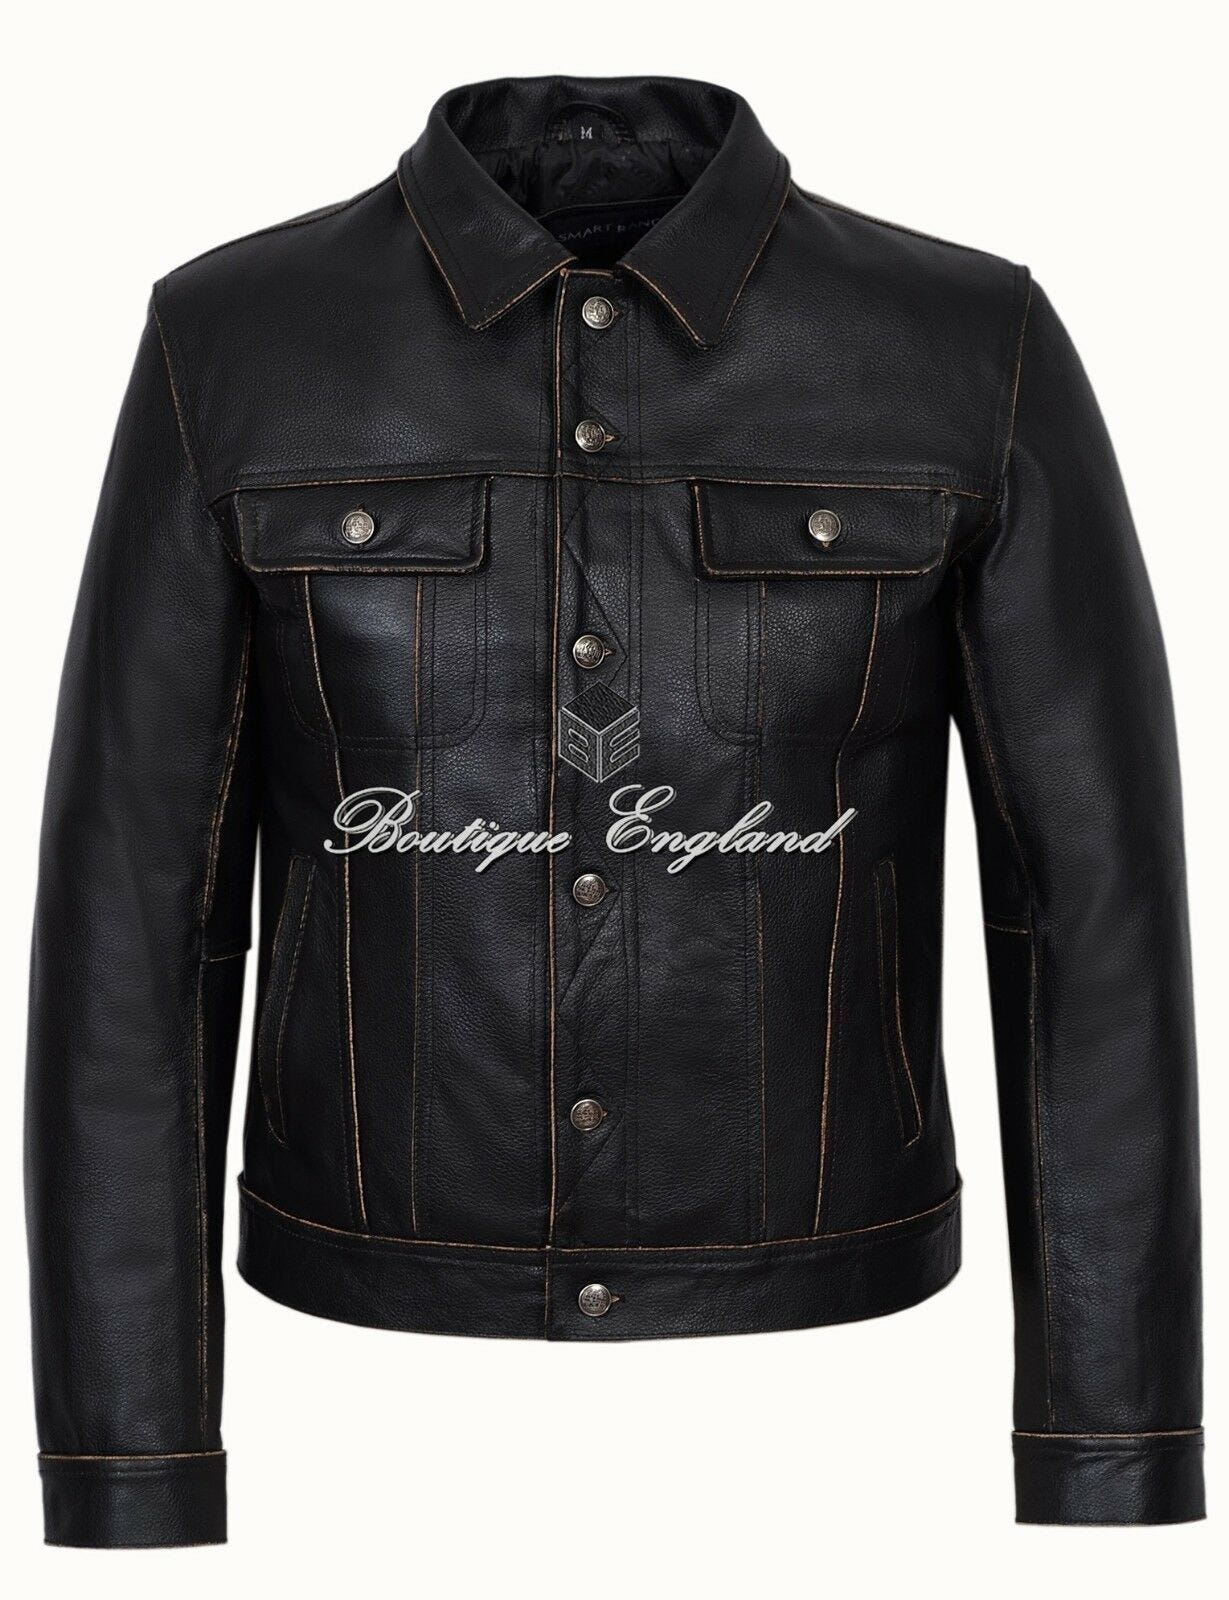 Why the Black Denim Jacket is a Good Alternative to Blue | by Boutique  England | Medium